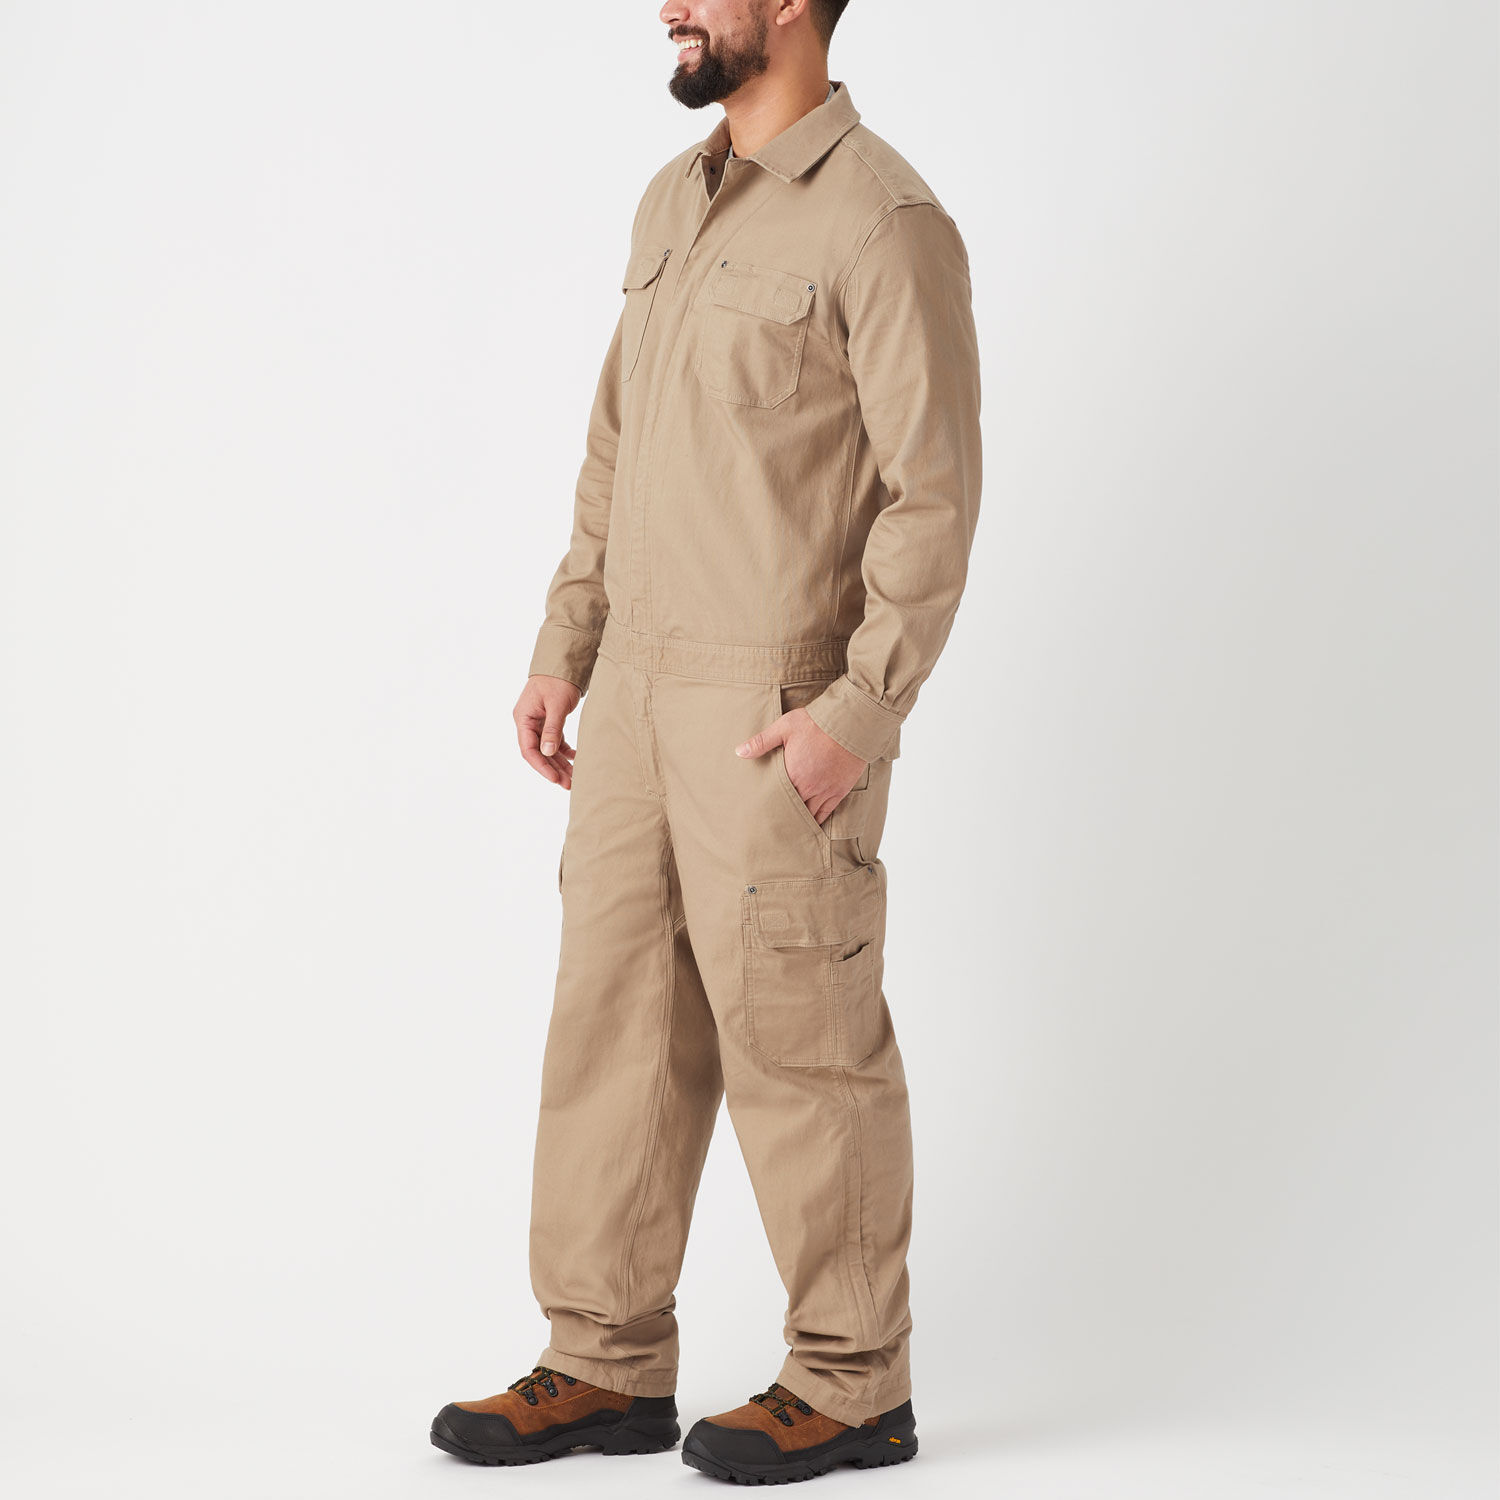 Men's DuluthFlex Fire Hose Coverall | Duluth Trading Company